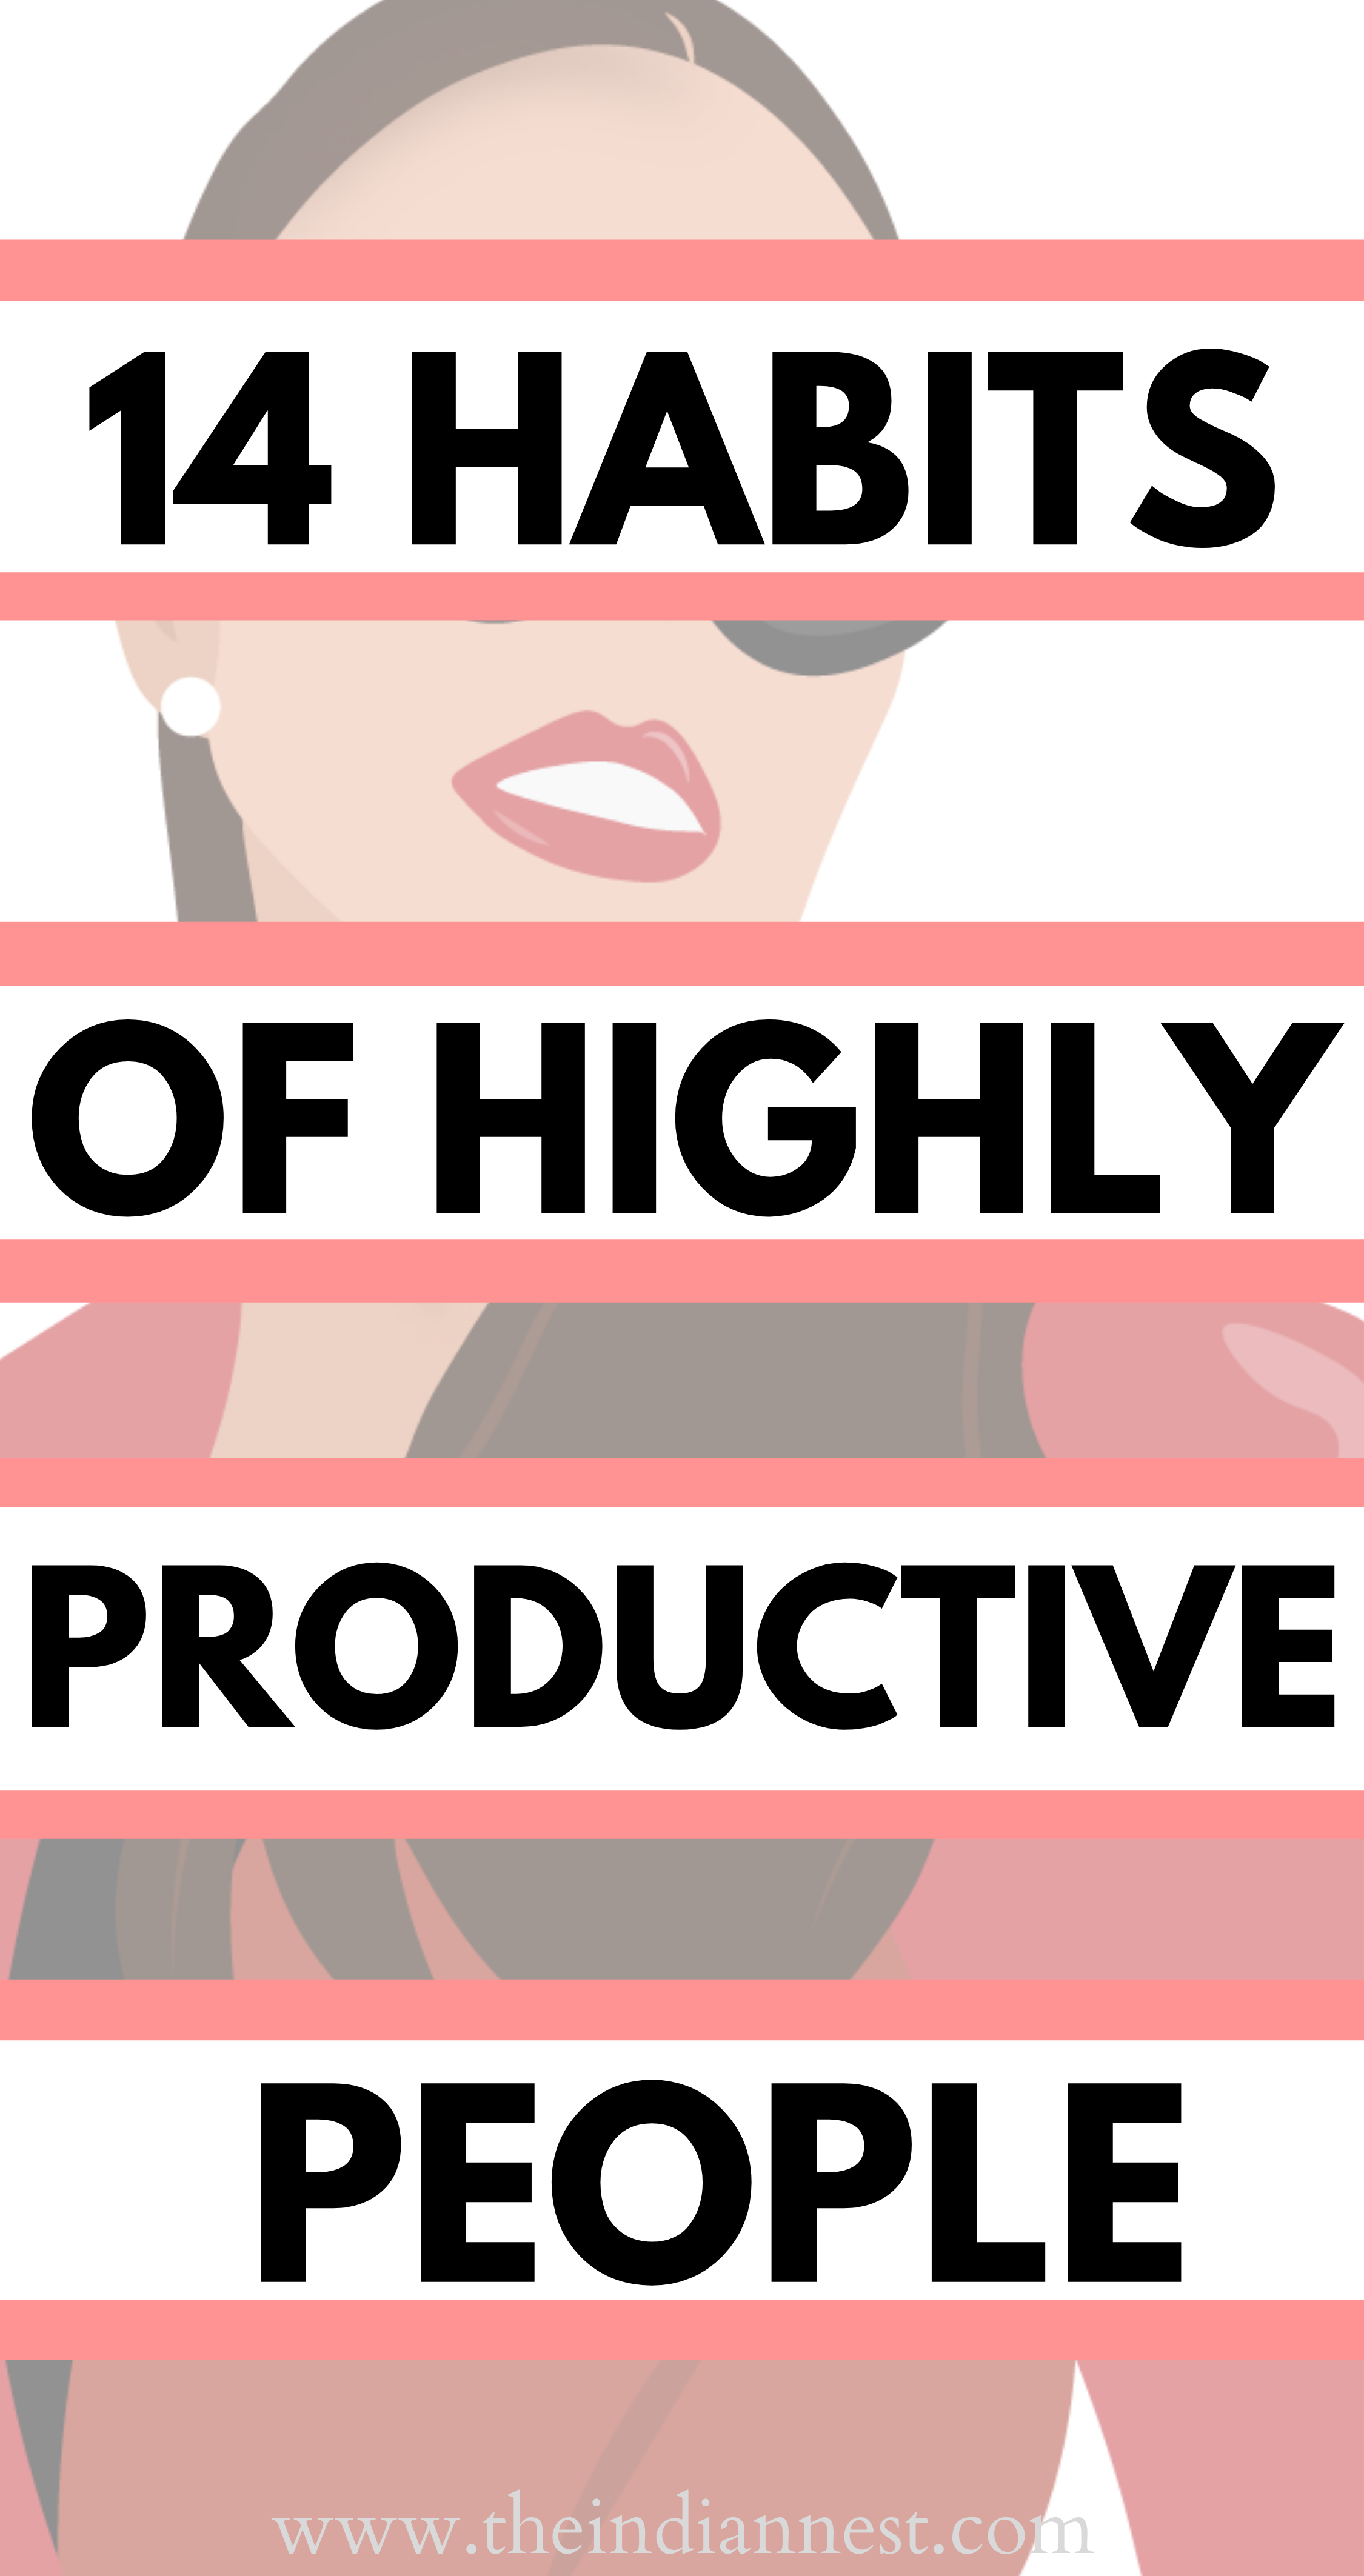 How to be more productive. Increase productivity and become highly efficient with these habits